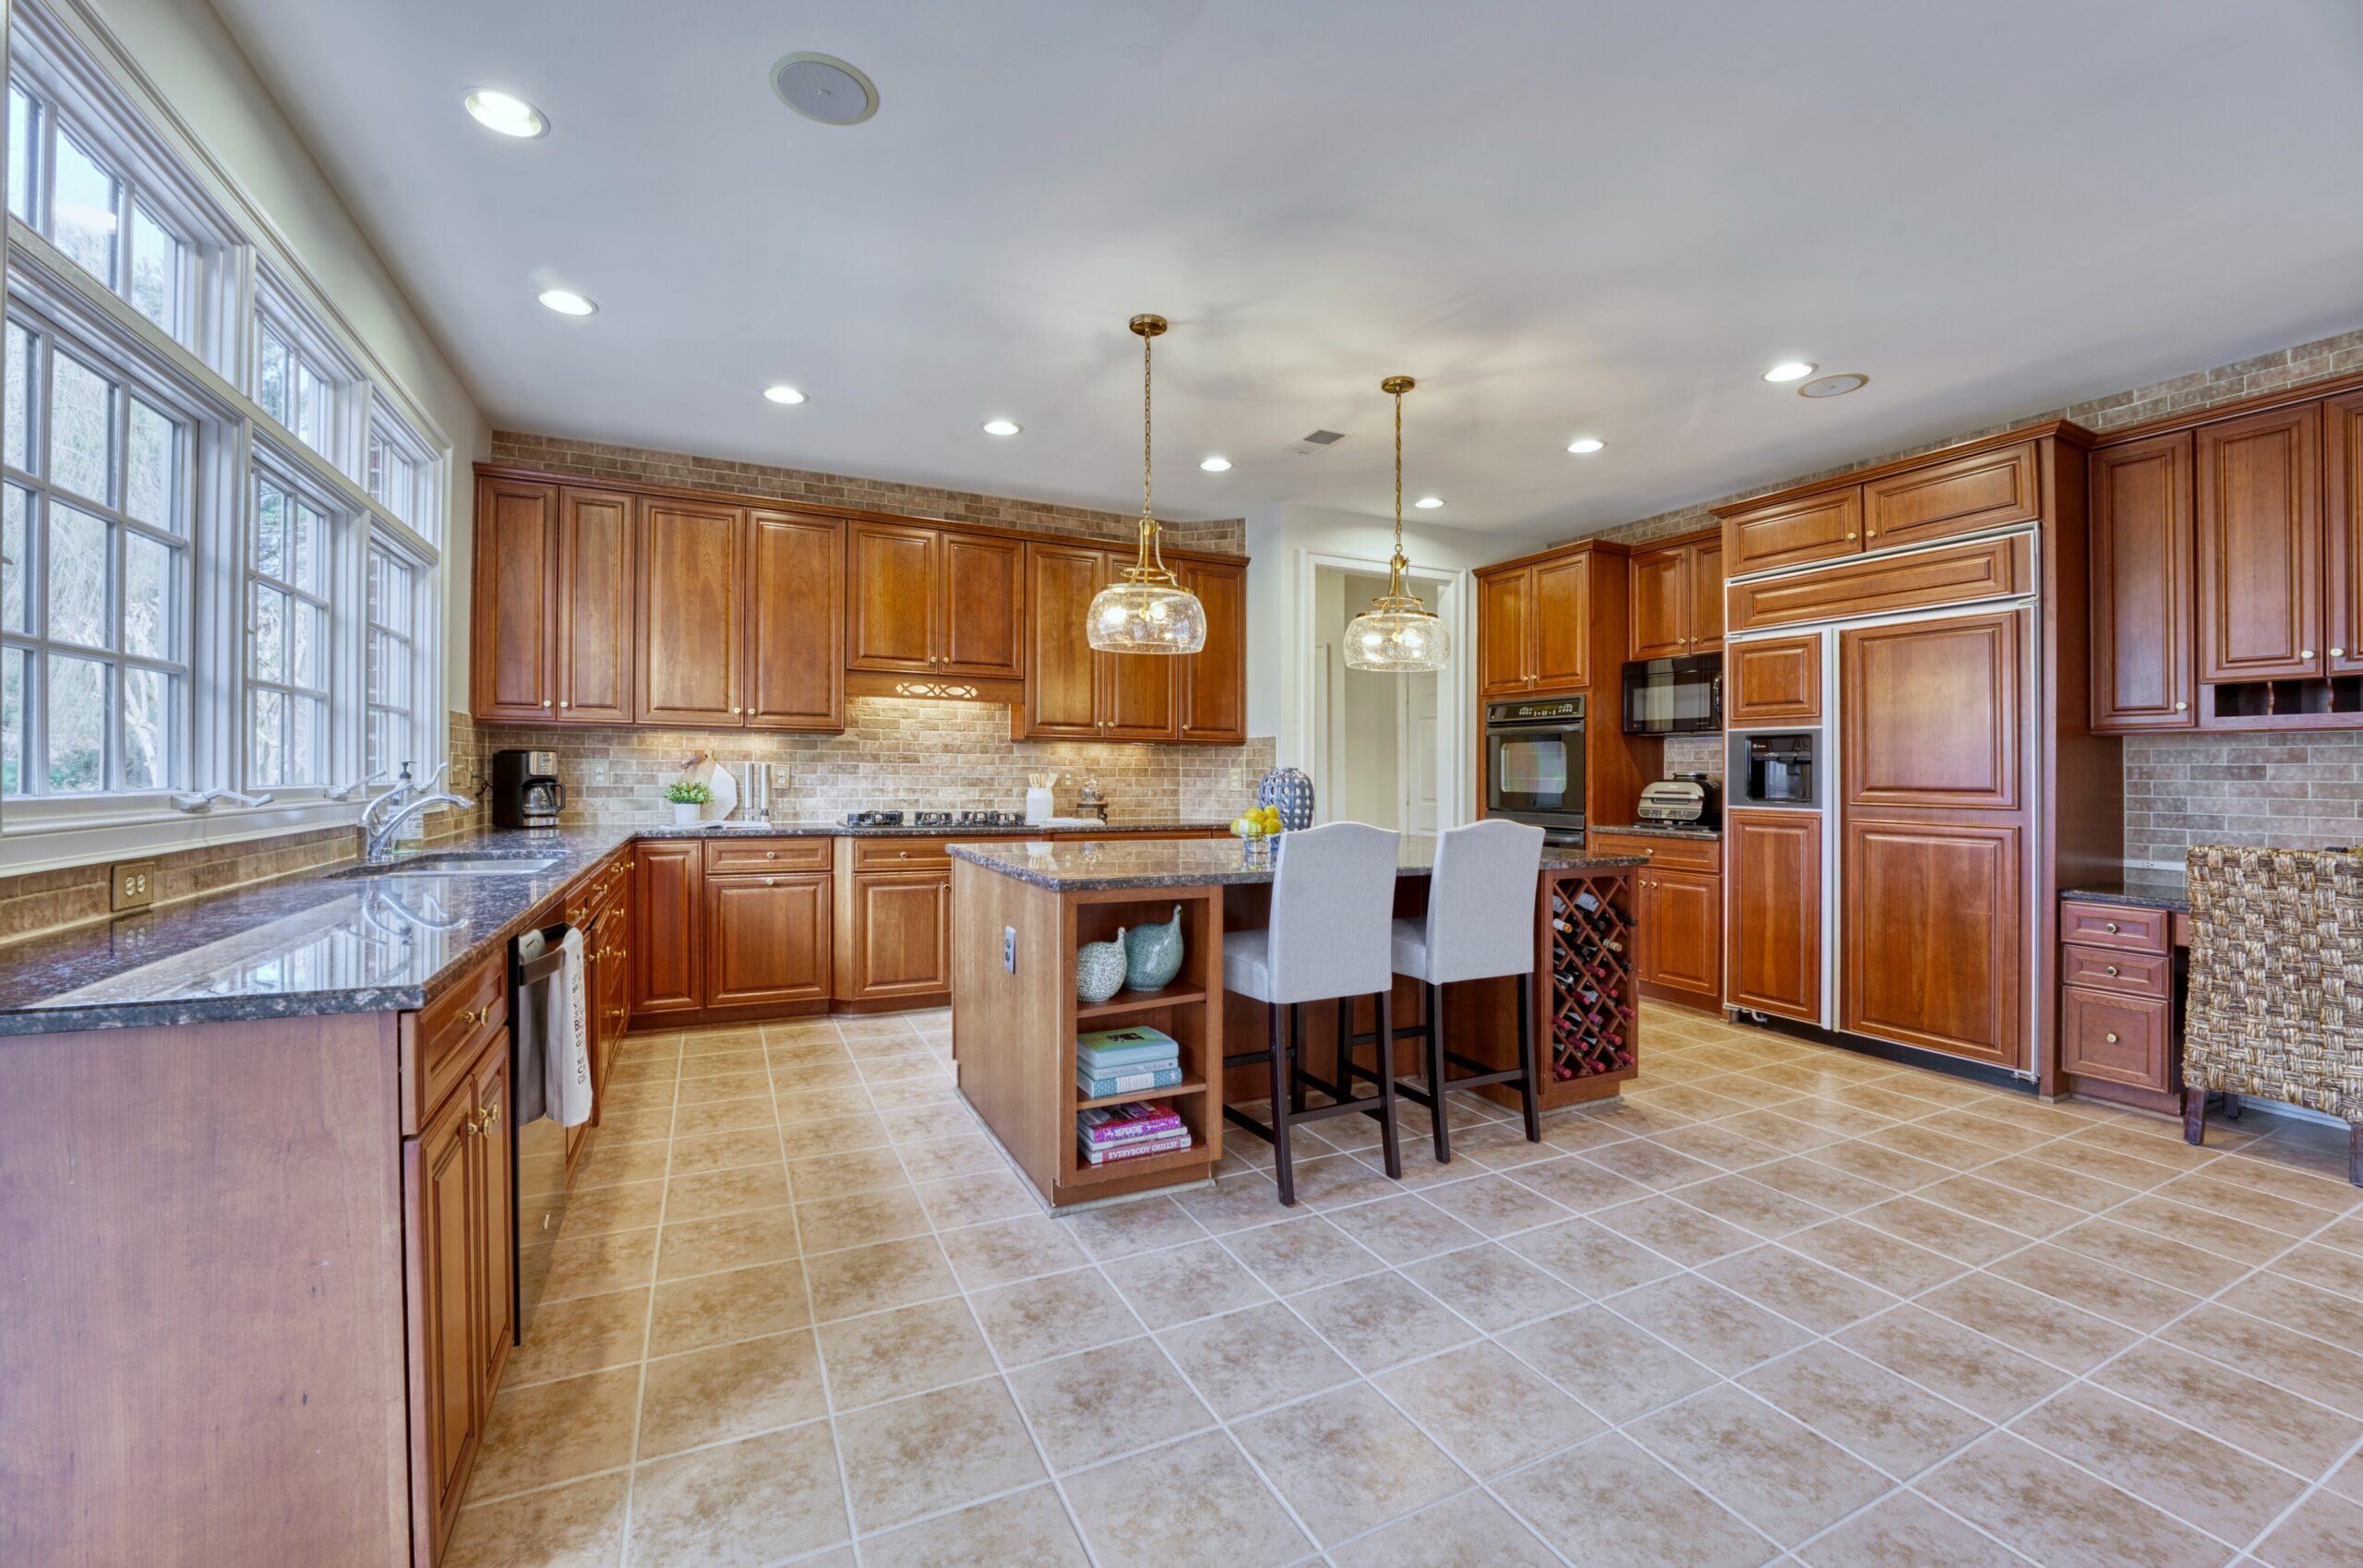 Professional interior photo of 17087 Bold Venture Drive, Leesburg - showing the kitchen with walnut cabinets and custom built in fridge, large island, and tile floors.